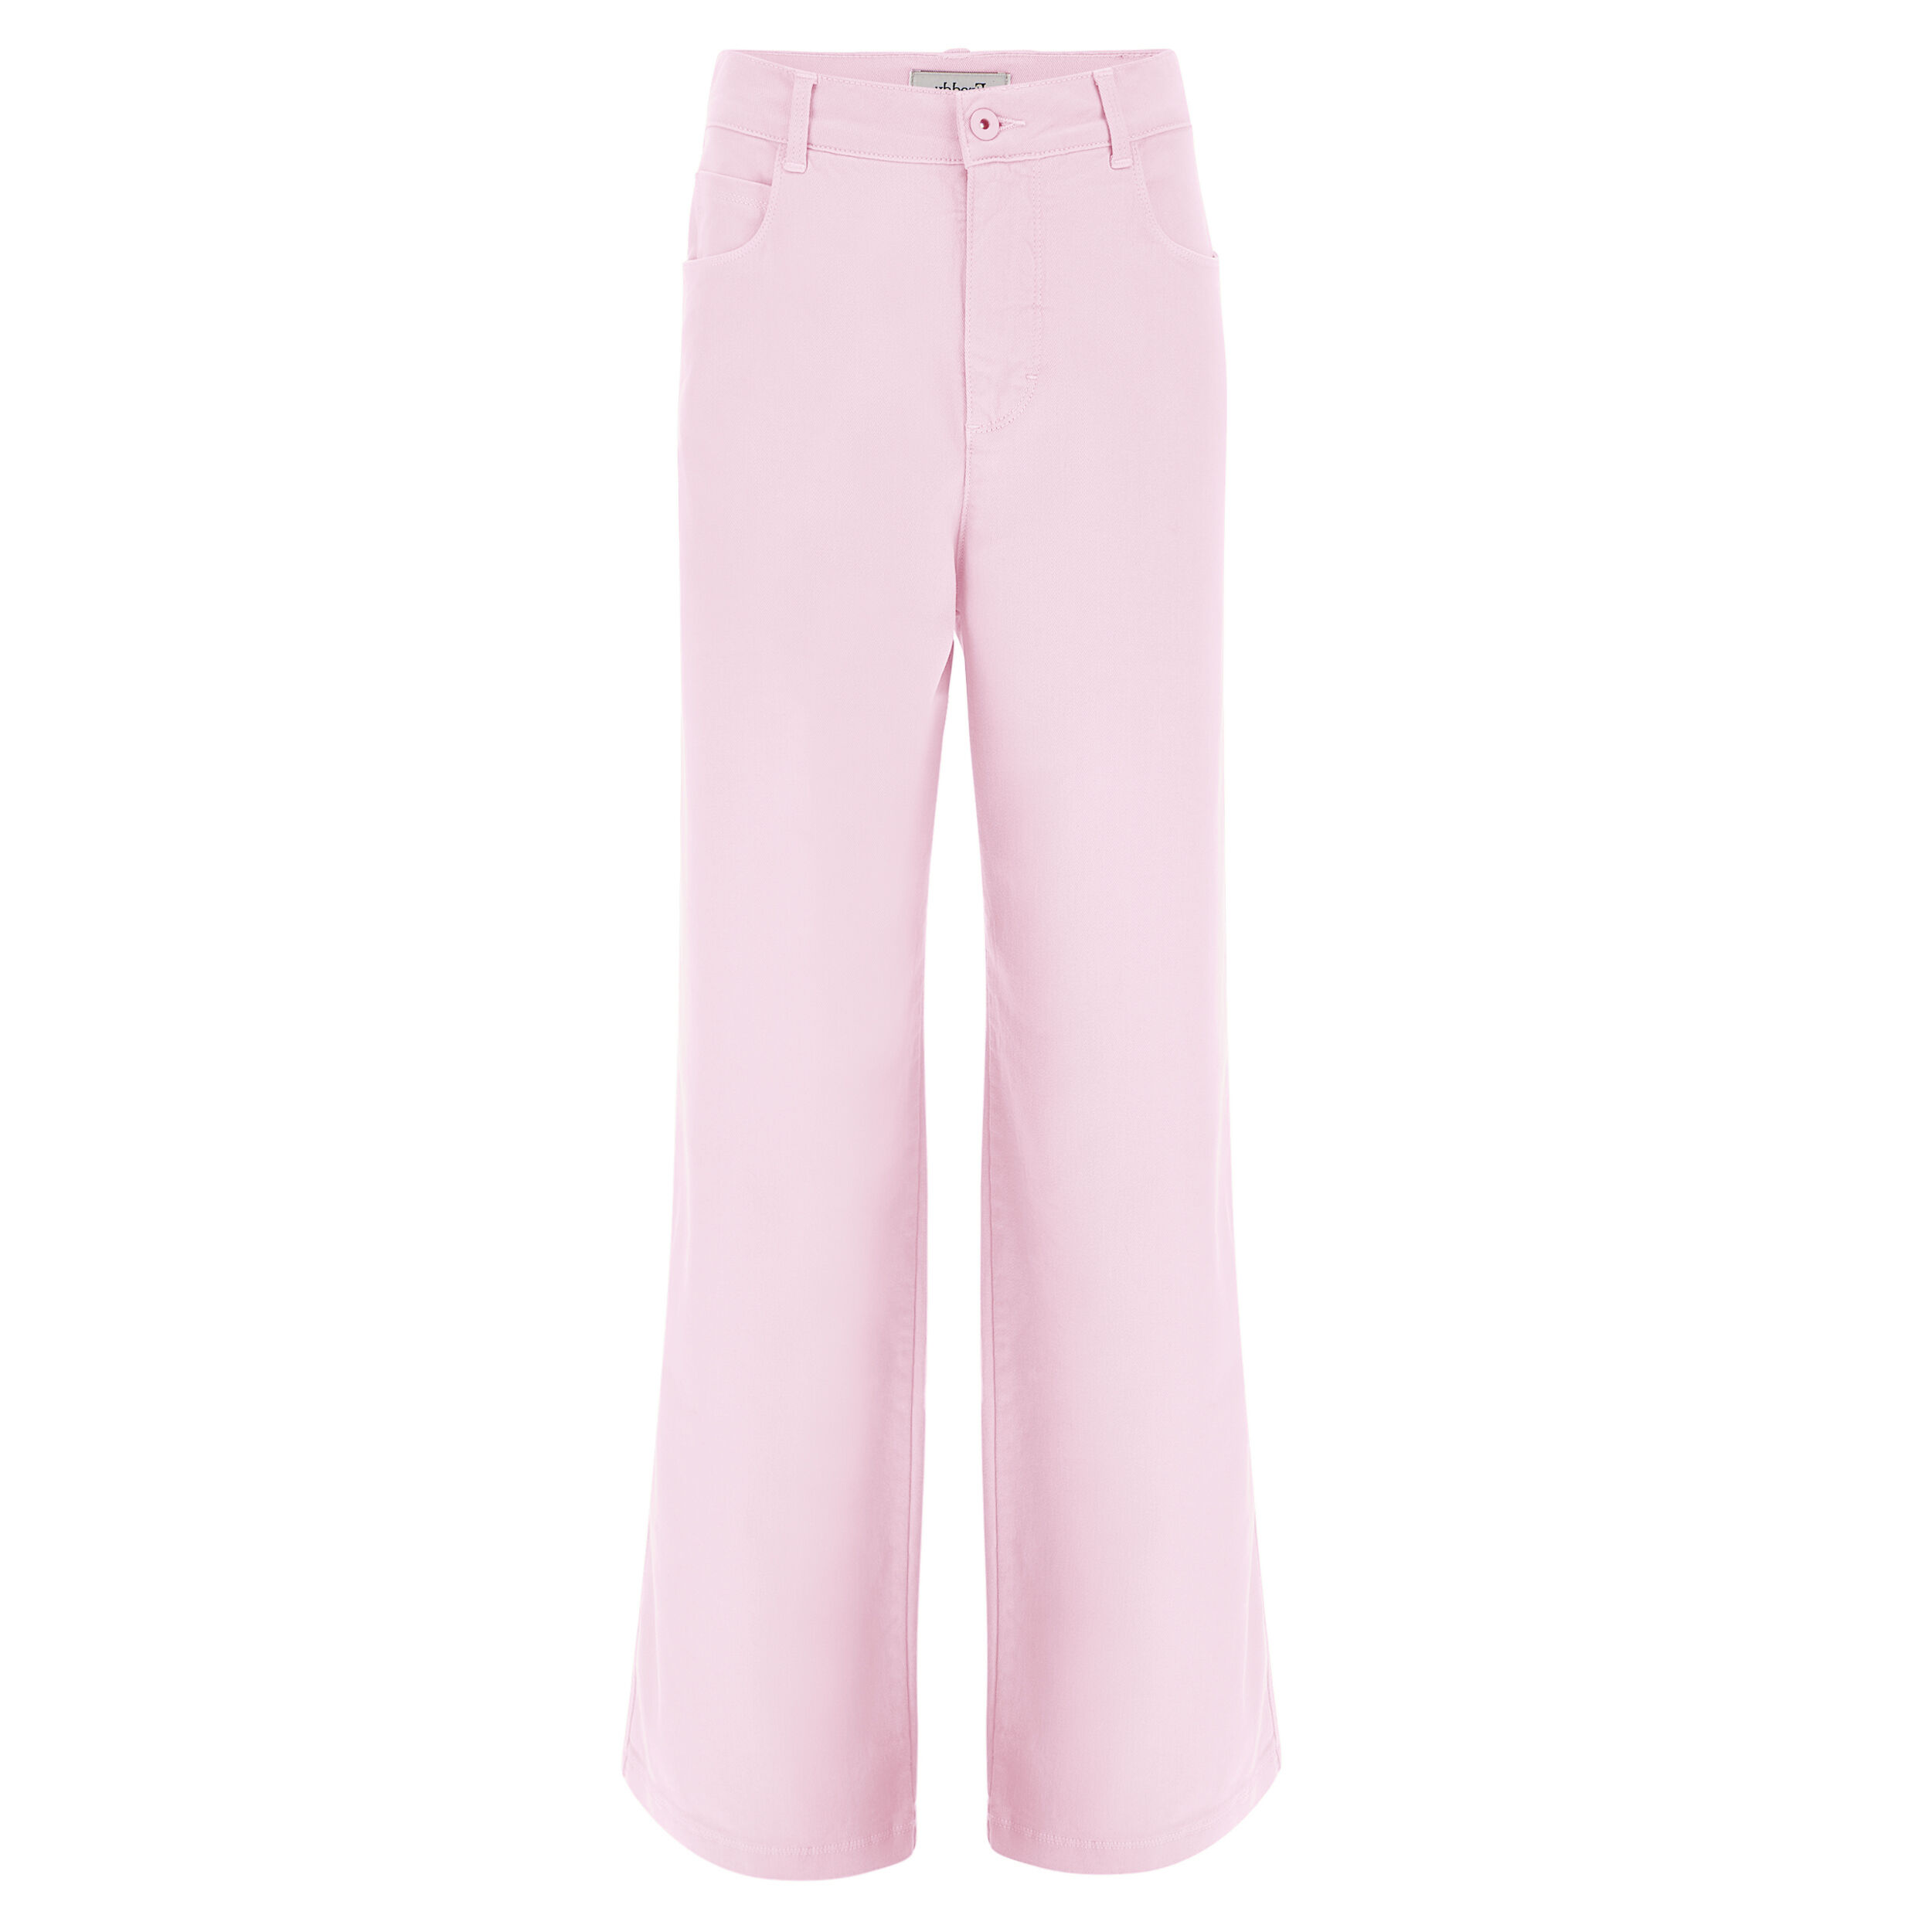 Freddy Jeans palazzo in denim navetta colorato tinto in capo Pink Lady Direct Dyed Donna Small